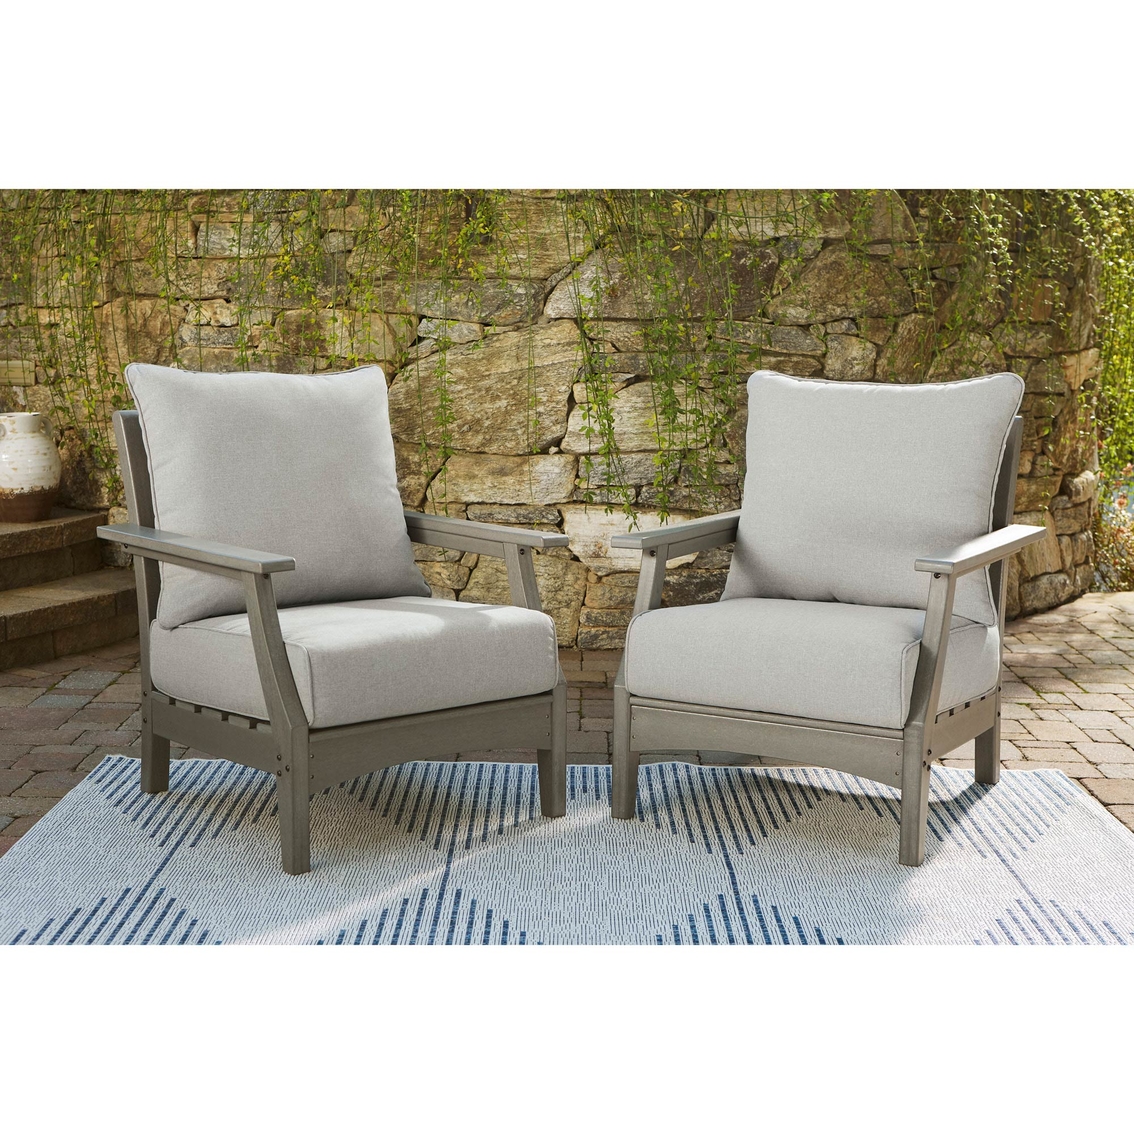 Signature Design by Ashley Visola Outdoor Lounge Chair 2 pk. - Image 2 of 6